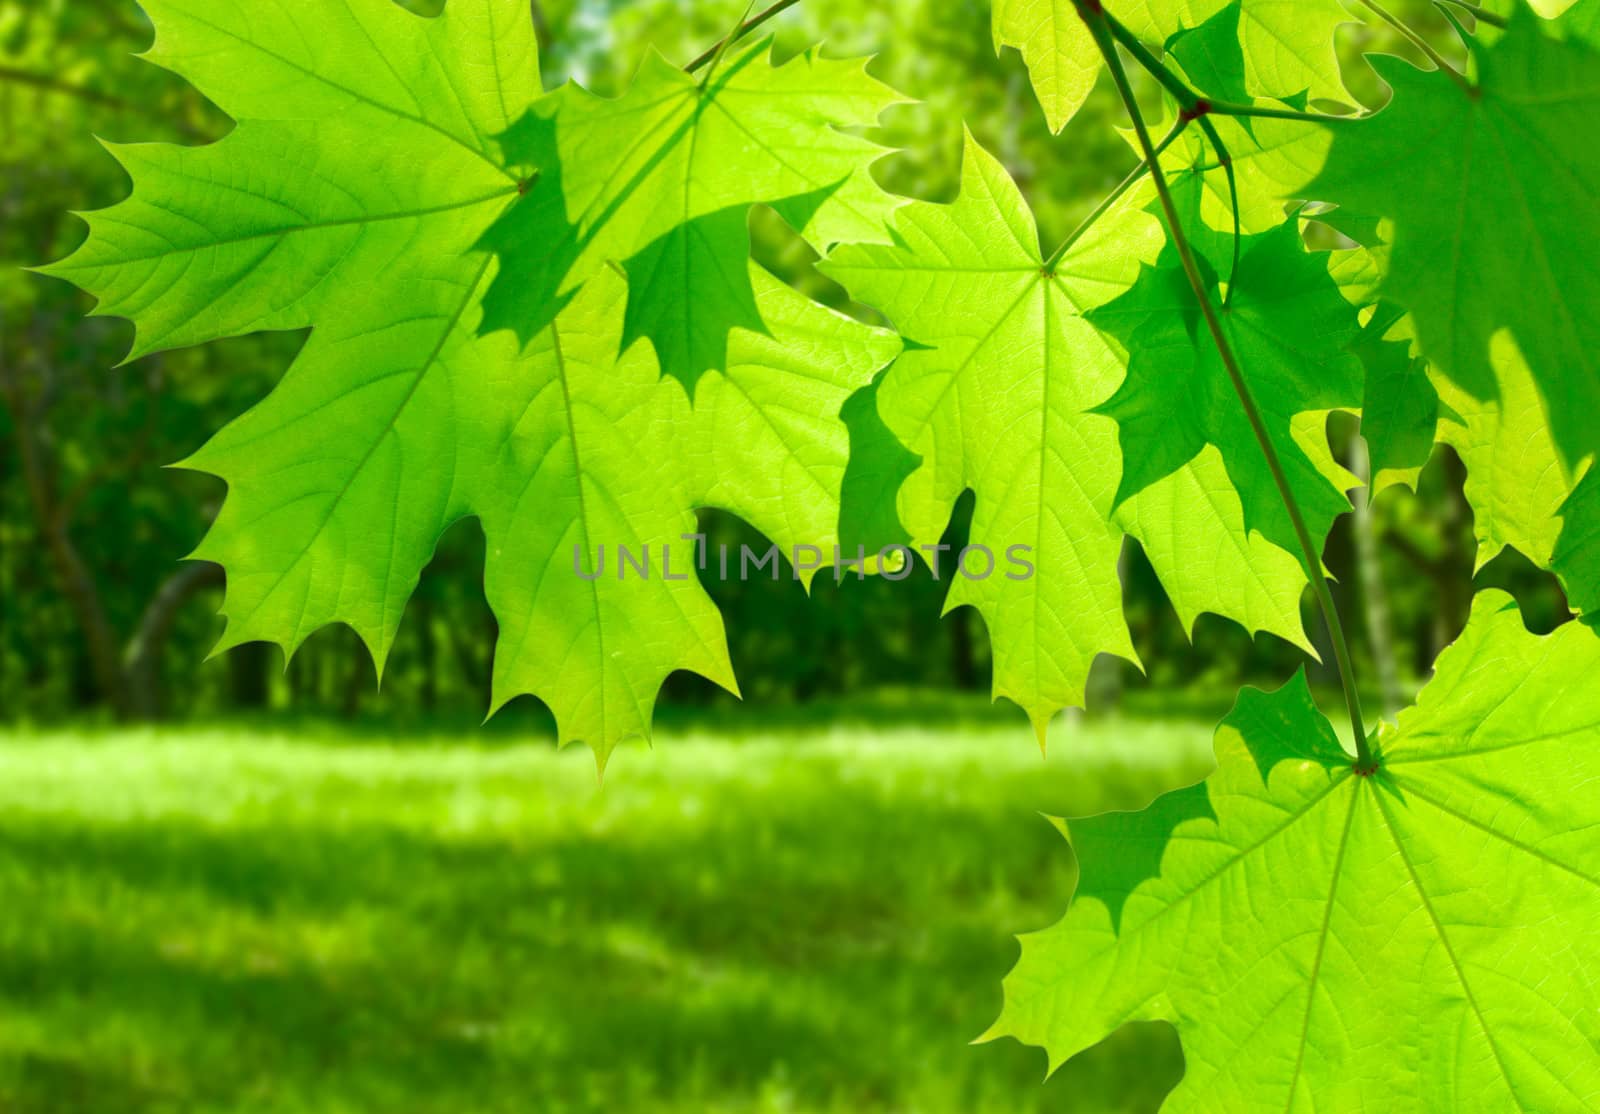 Green maple leaves on defocused background by rbv